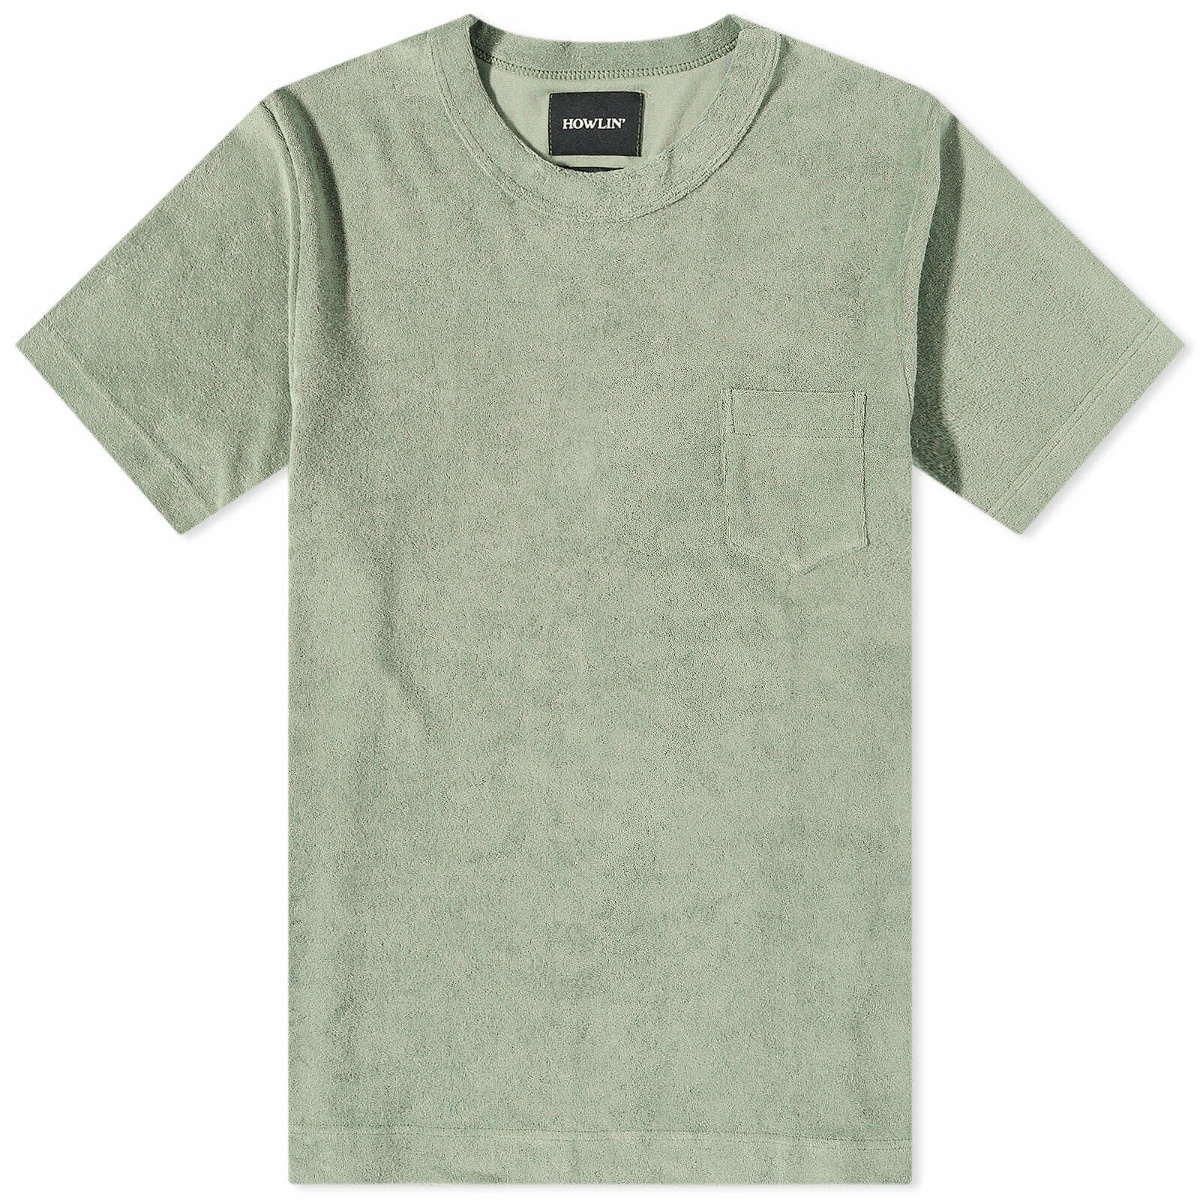 Howlin by Morrison Men's Howlin' Fons Towelling Pocket T-Shirt in Agave ...